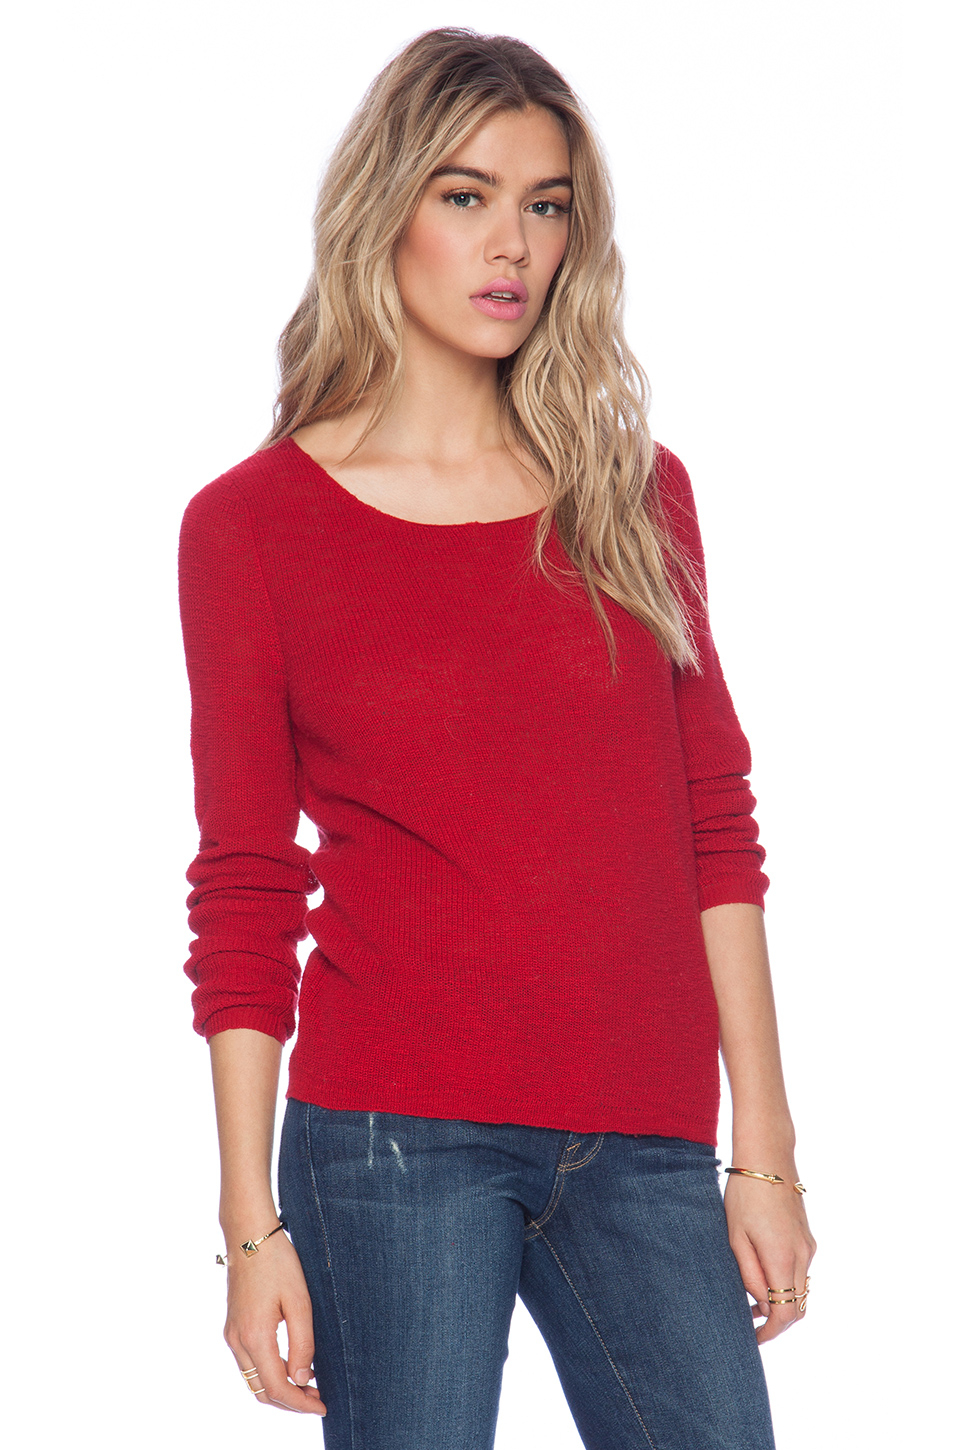 Lyst - American Vintage Oram Sweater in Red